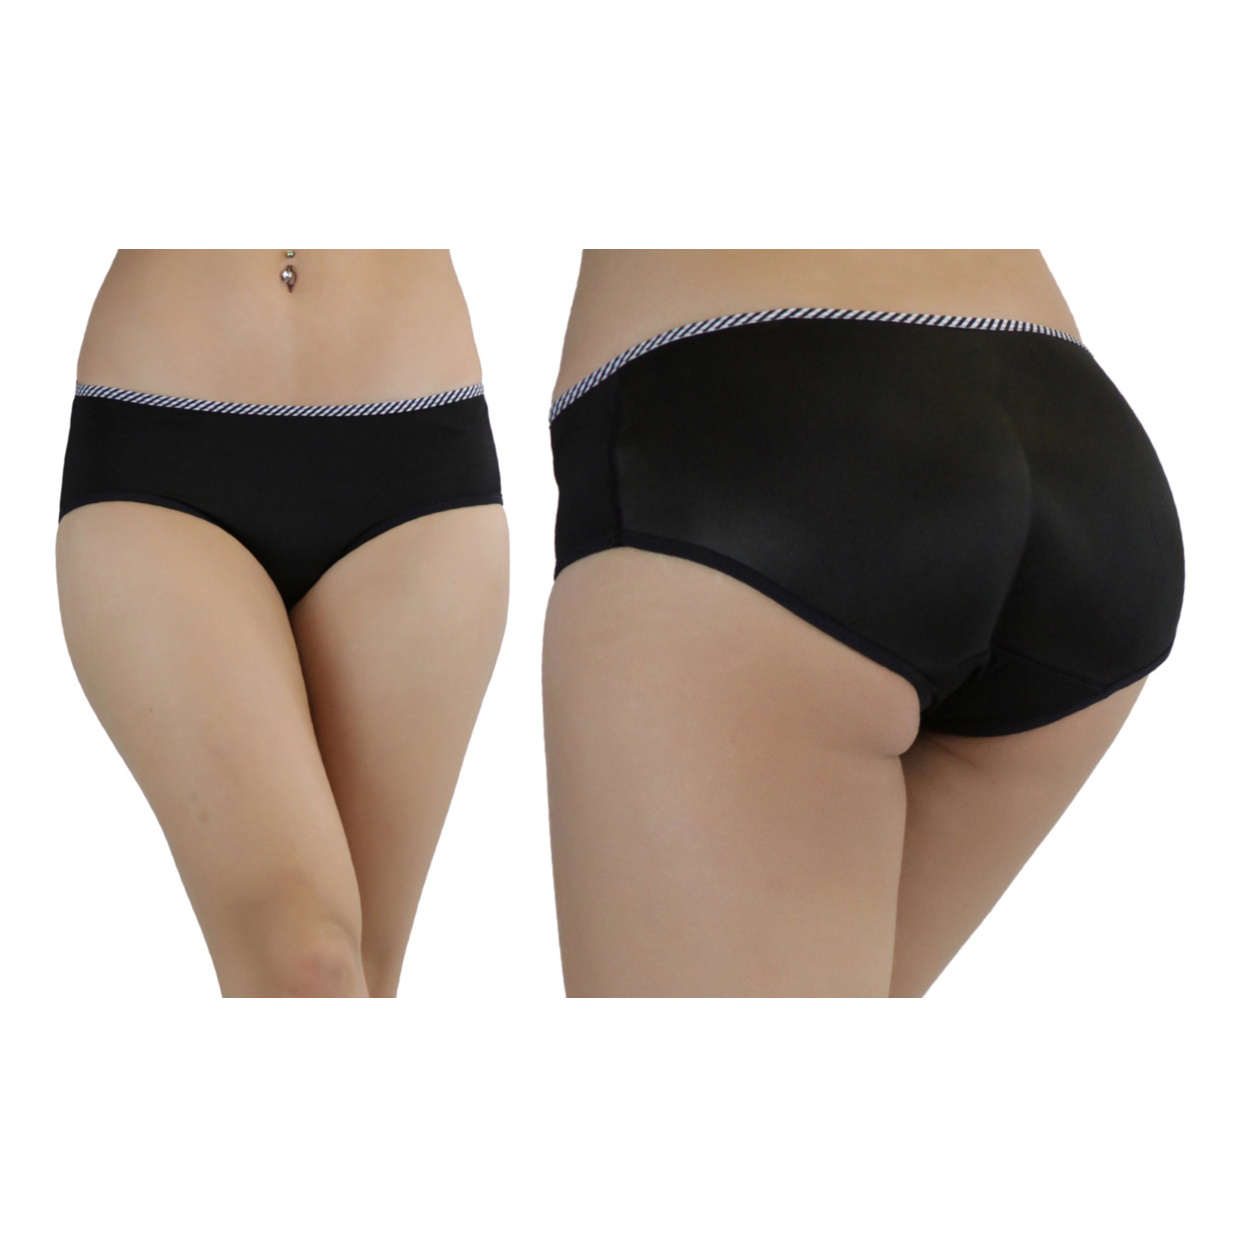 Women's Instant Booty Boosters Padded Panty - Black, S